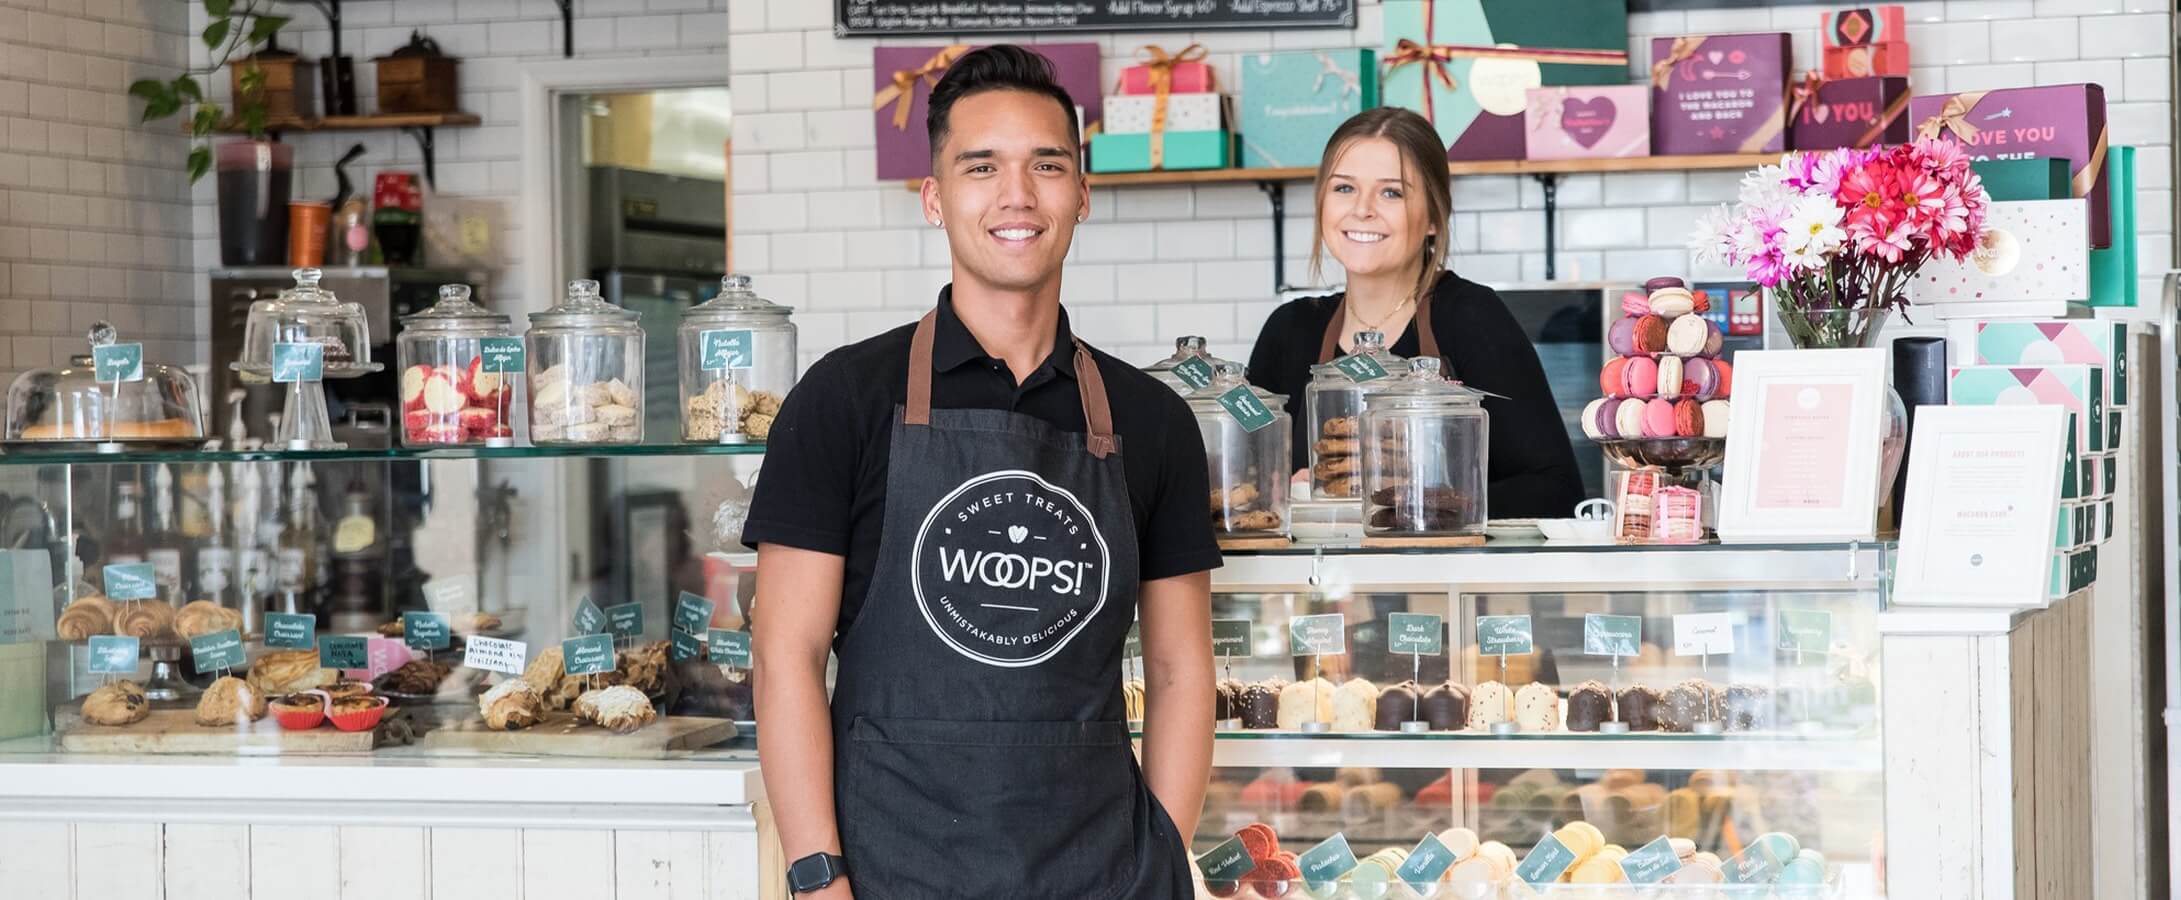 A smiling man and a woman wearing Woops! aprons are surrounded by macarons, macaron boxes, a display case with macarons, and cookies.